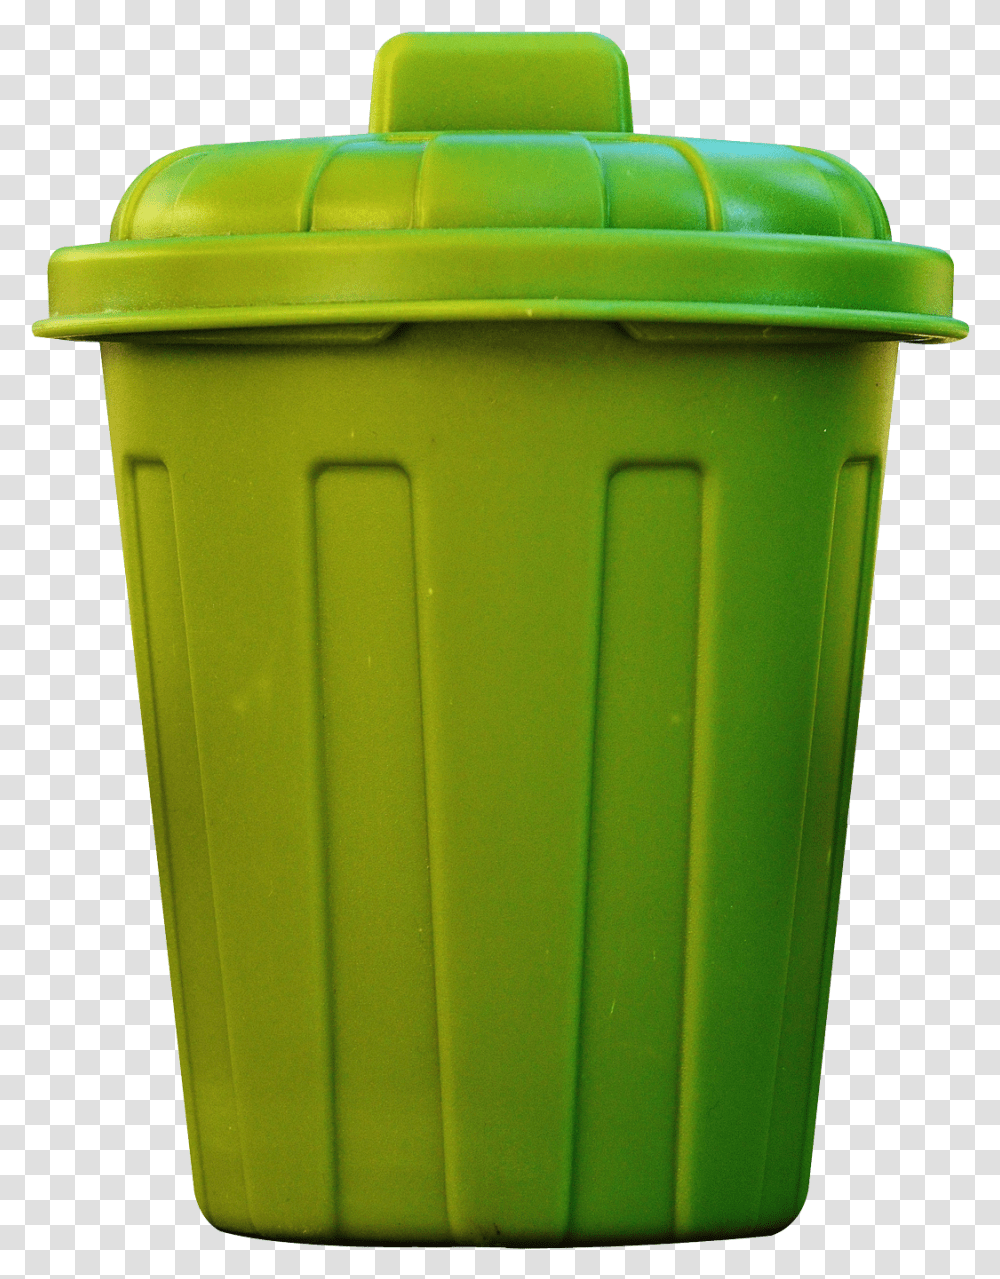 Recycle Bin Image Dustbin, Mailbox, Letterbox, Tin, Trash Can Transparent Png